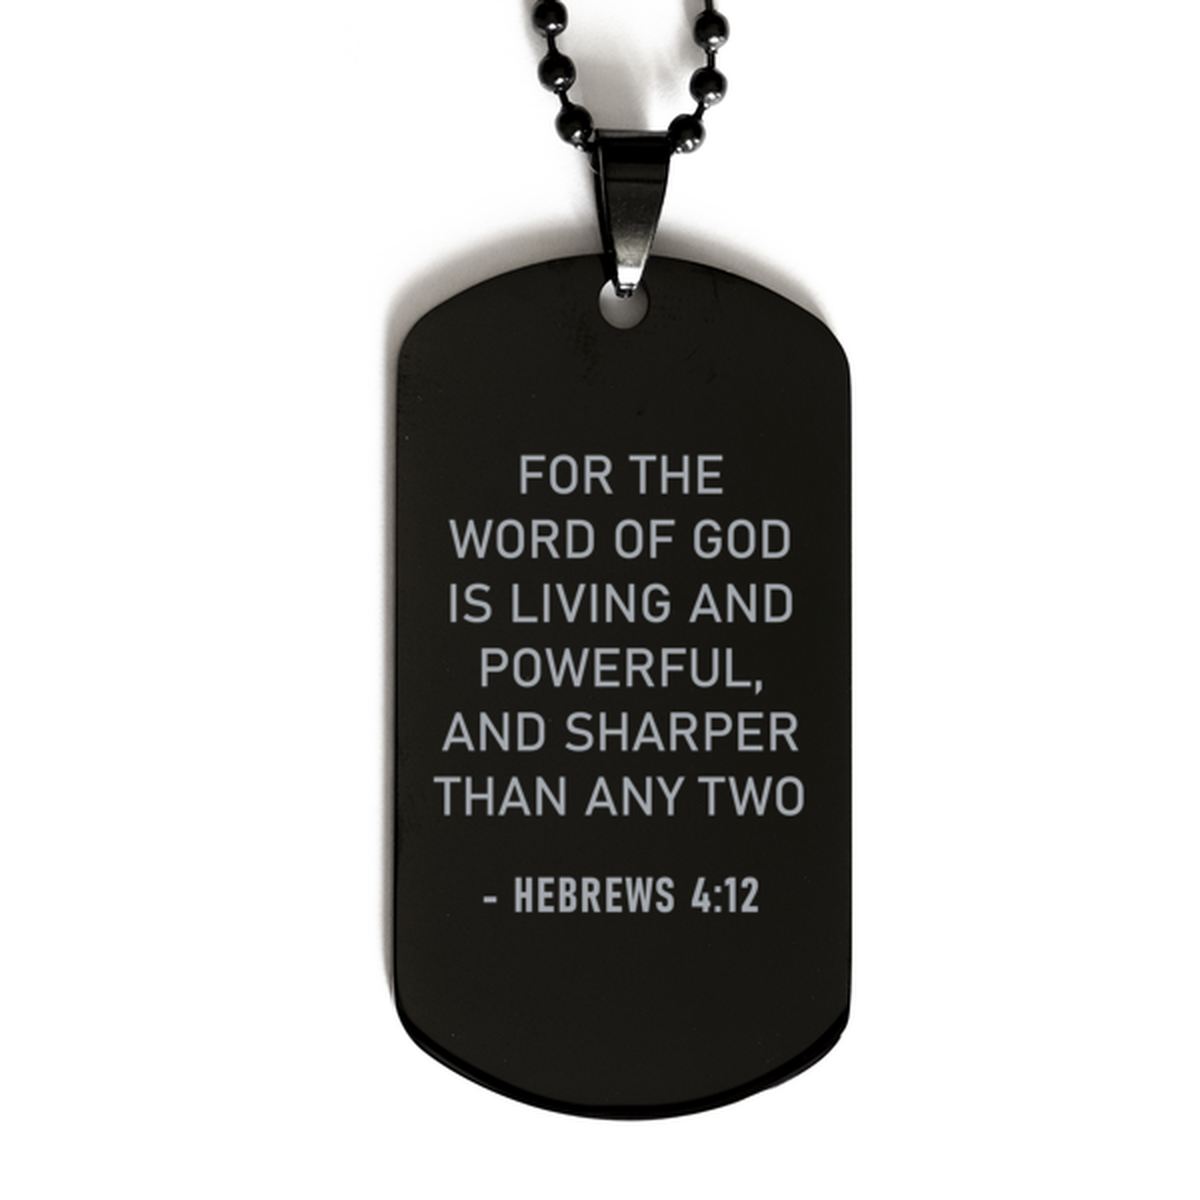 Bible Verse Black Dog Tag, Hebrews 4:12 For The Word Of God Is Living And Powerful, And, Christian Inspirational Necklace Gifts For Men Women